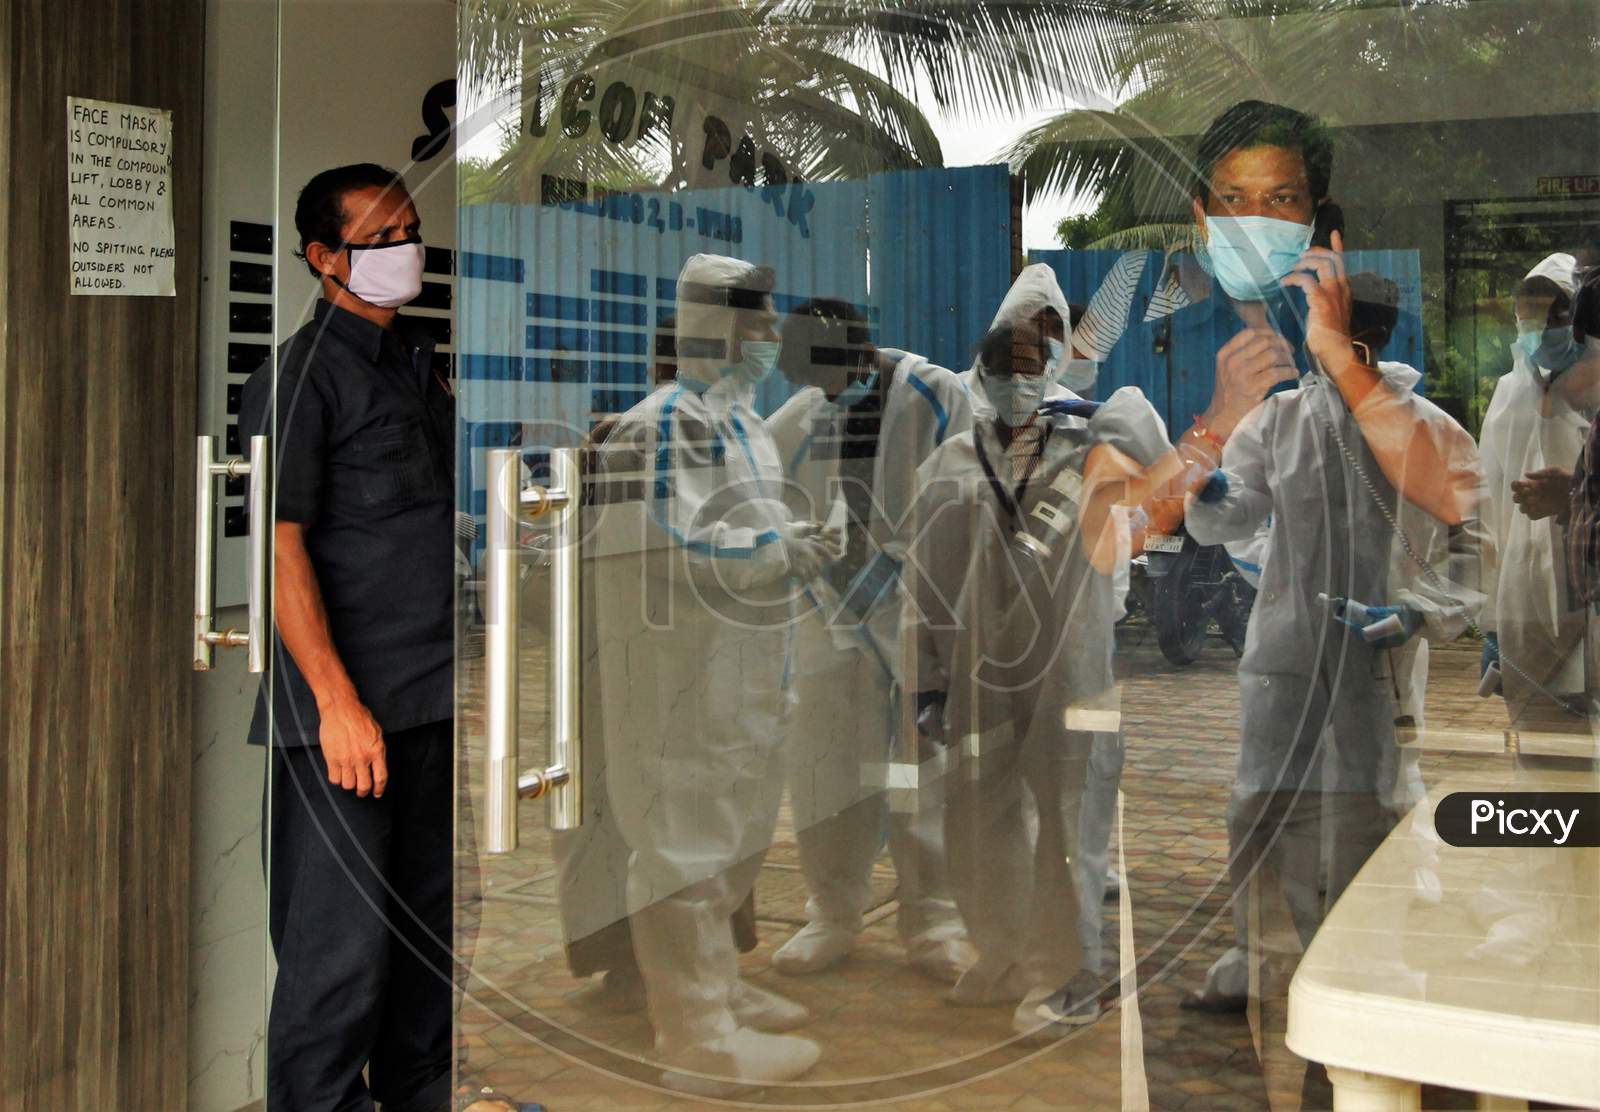 Healthcare workers wearing personal protective equipment (PPE) arrive on spot for screening, at a residential building, during a check-up campaign for the coronavirus disease (COVID-19), in Mumbai, India on July 26, 2020.